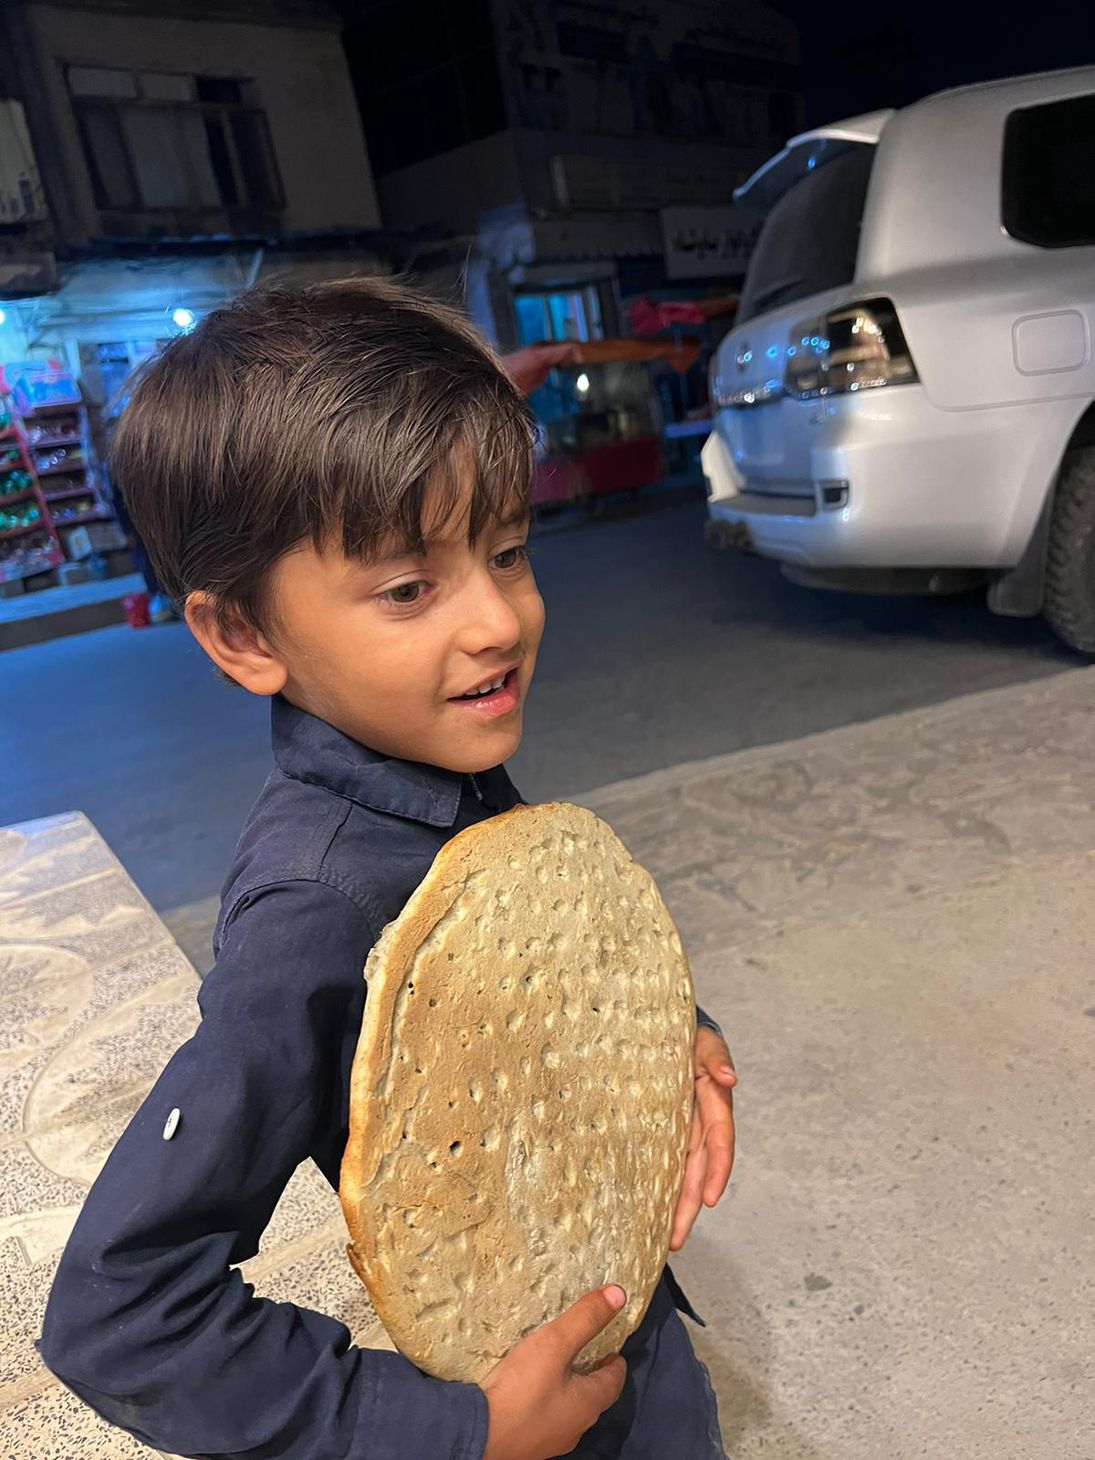 Little black haired boy wearing dark blue button up shirt smiles and clutches his hemp bread next to a car in the background.